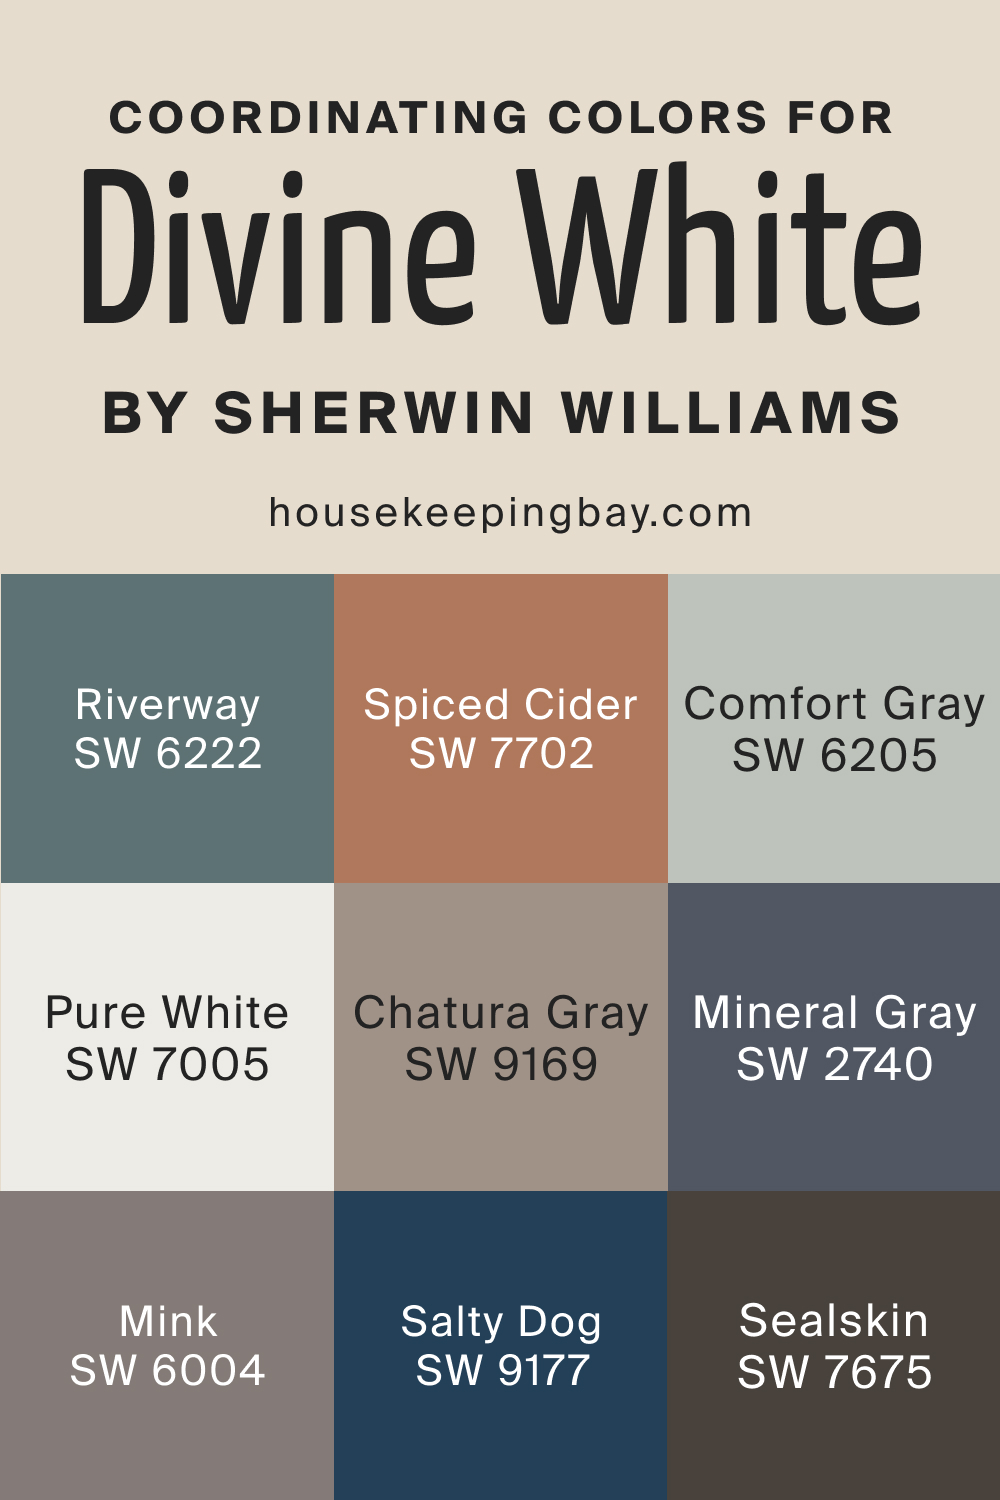 Coordinating Colors for SW Divine White by Sherwin Williams